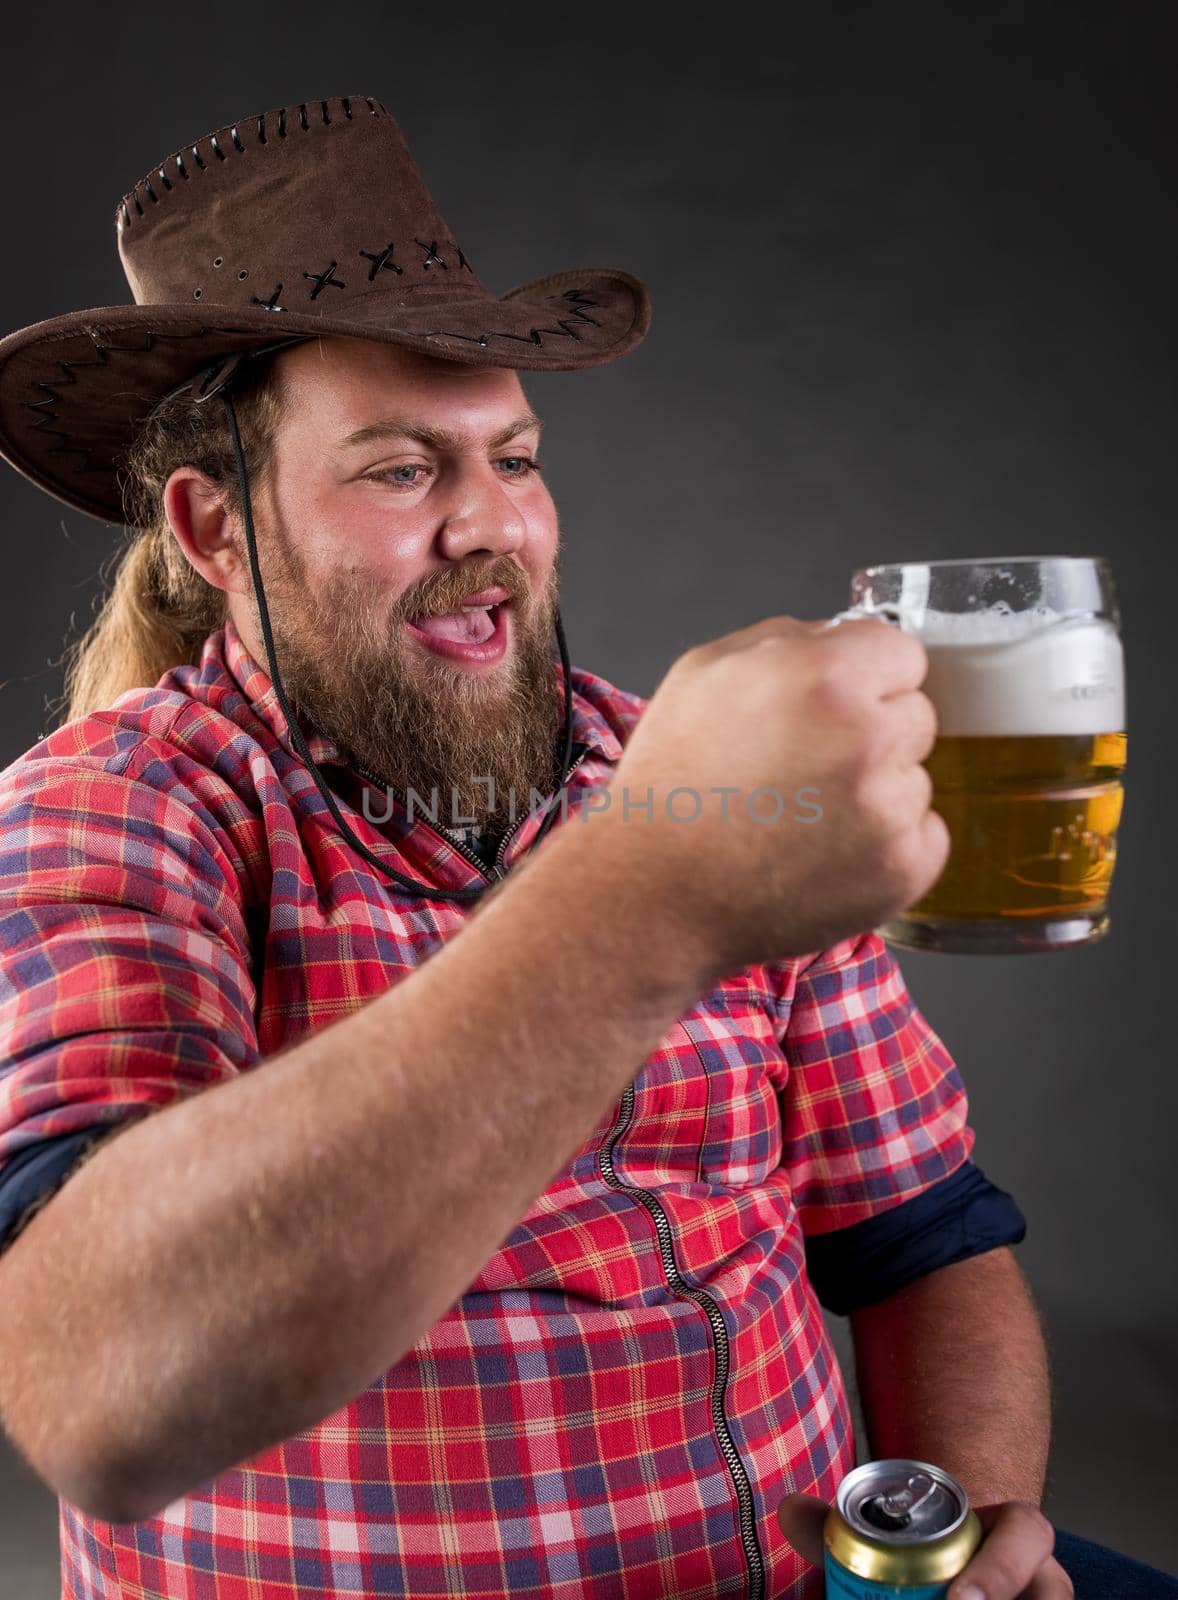 Portrait of funny young man drinking beer from mug in studio